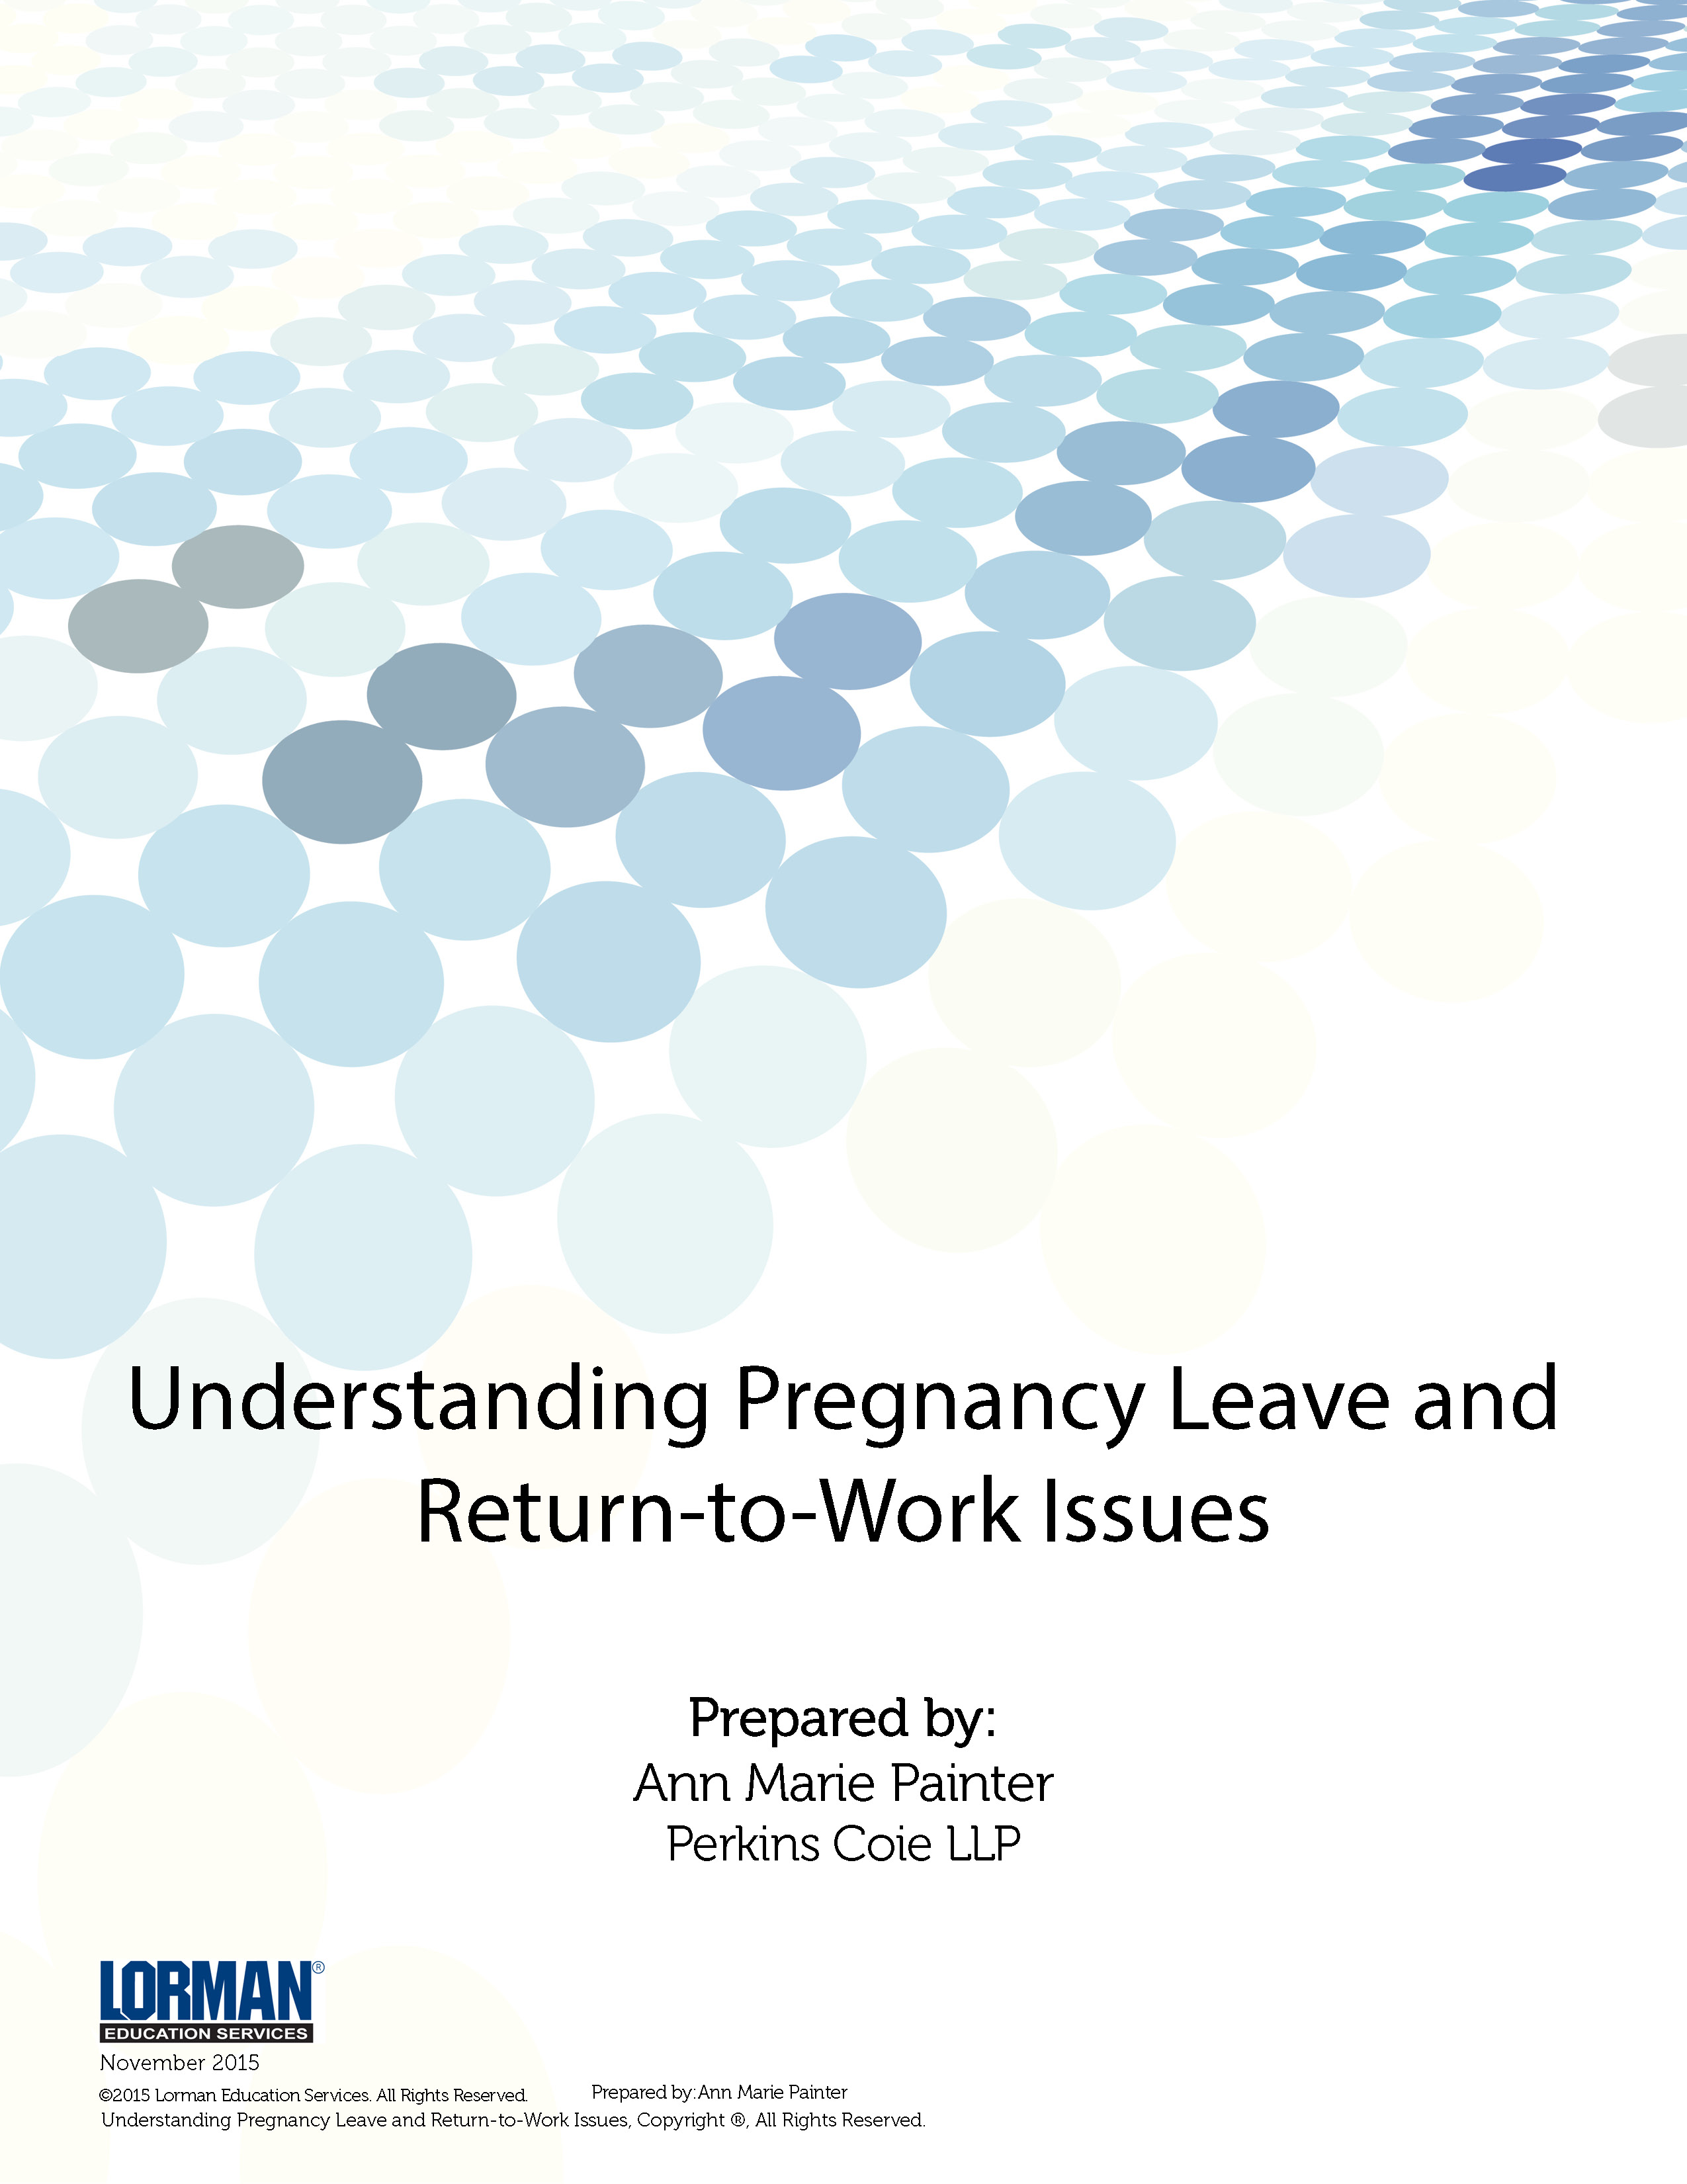 Understanding Pregnancy Leave and Return-to-Work Issues